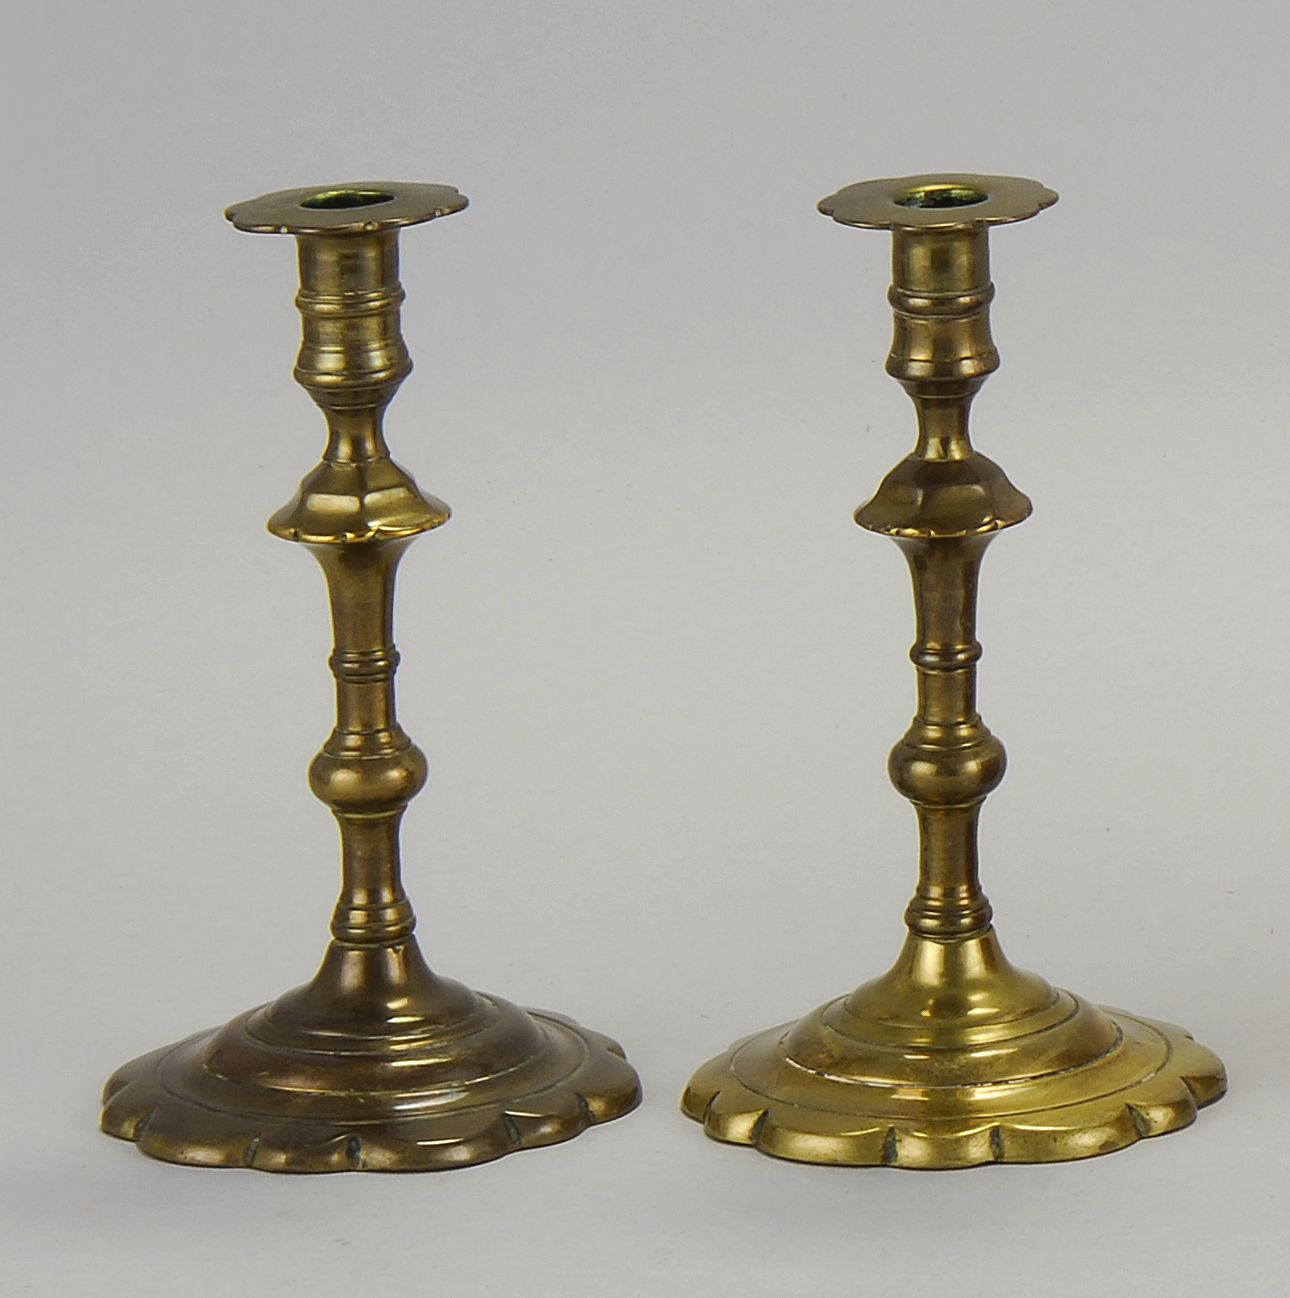 PAIR OF EARLY QUEEN ANNE BRASS